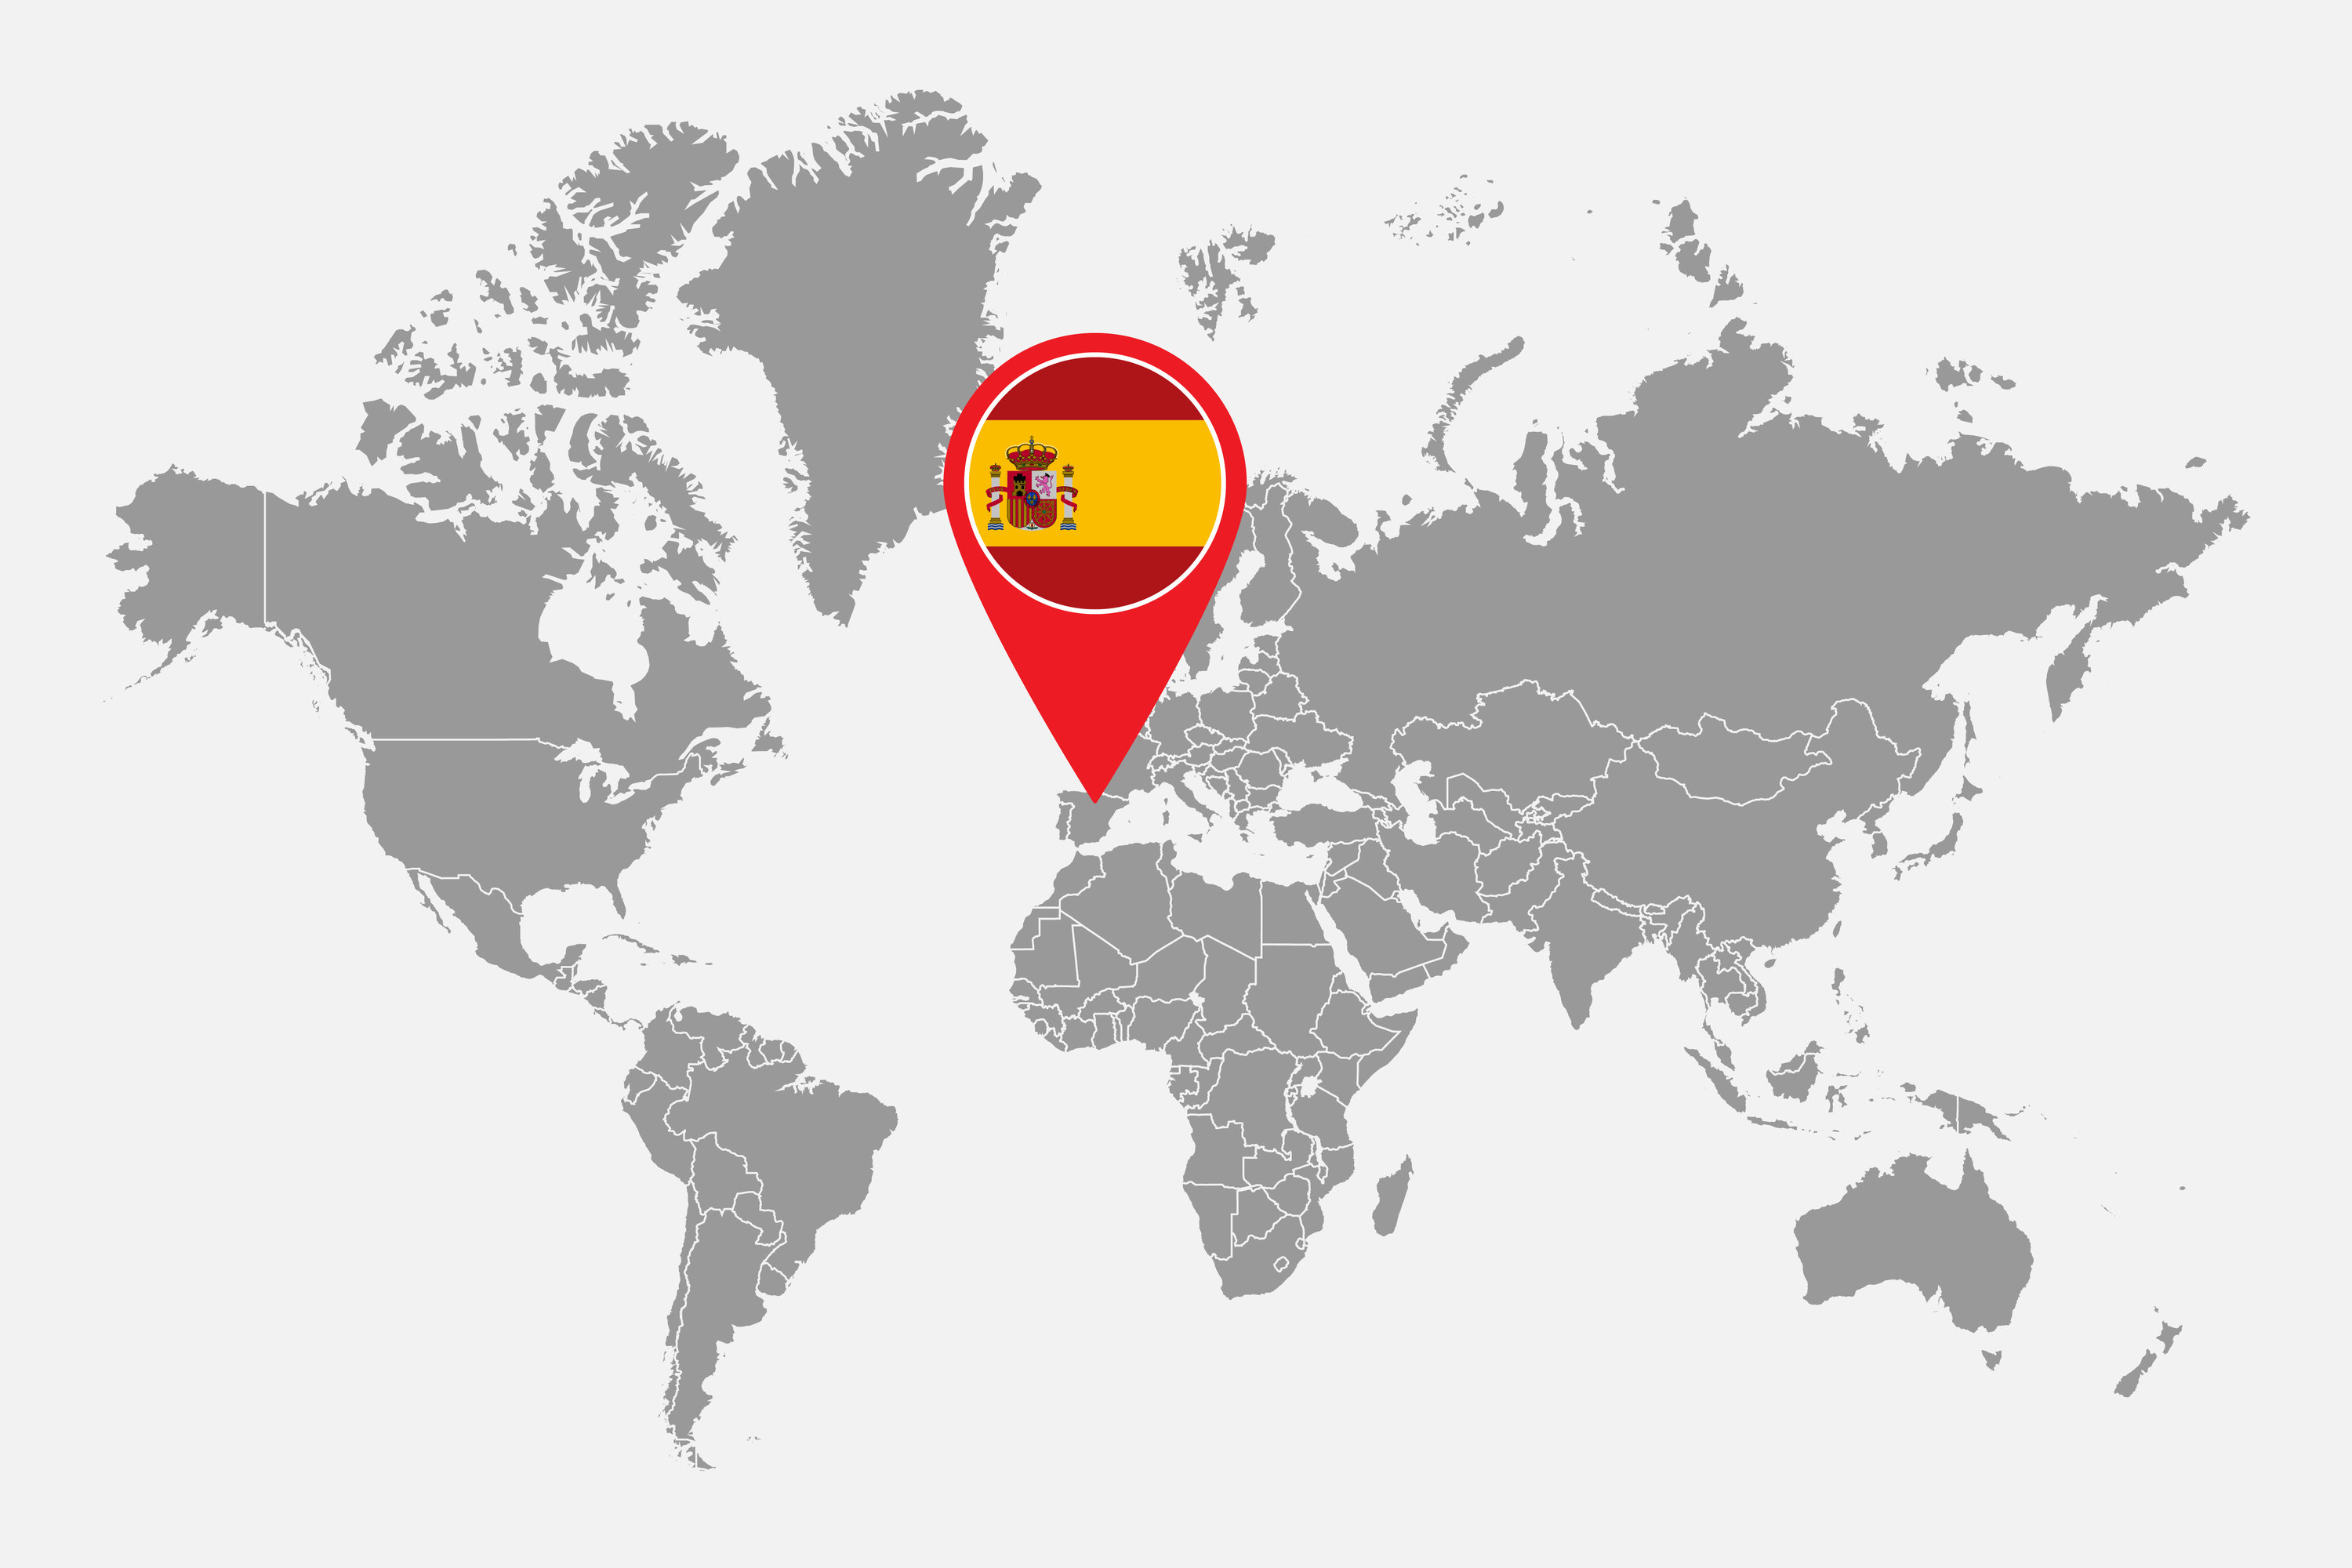 A world map with Spain indicated